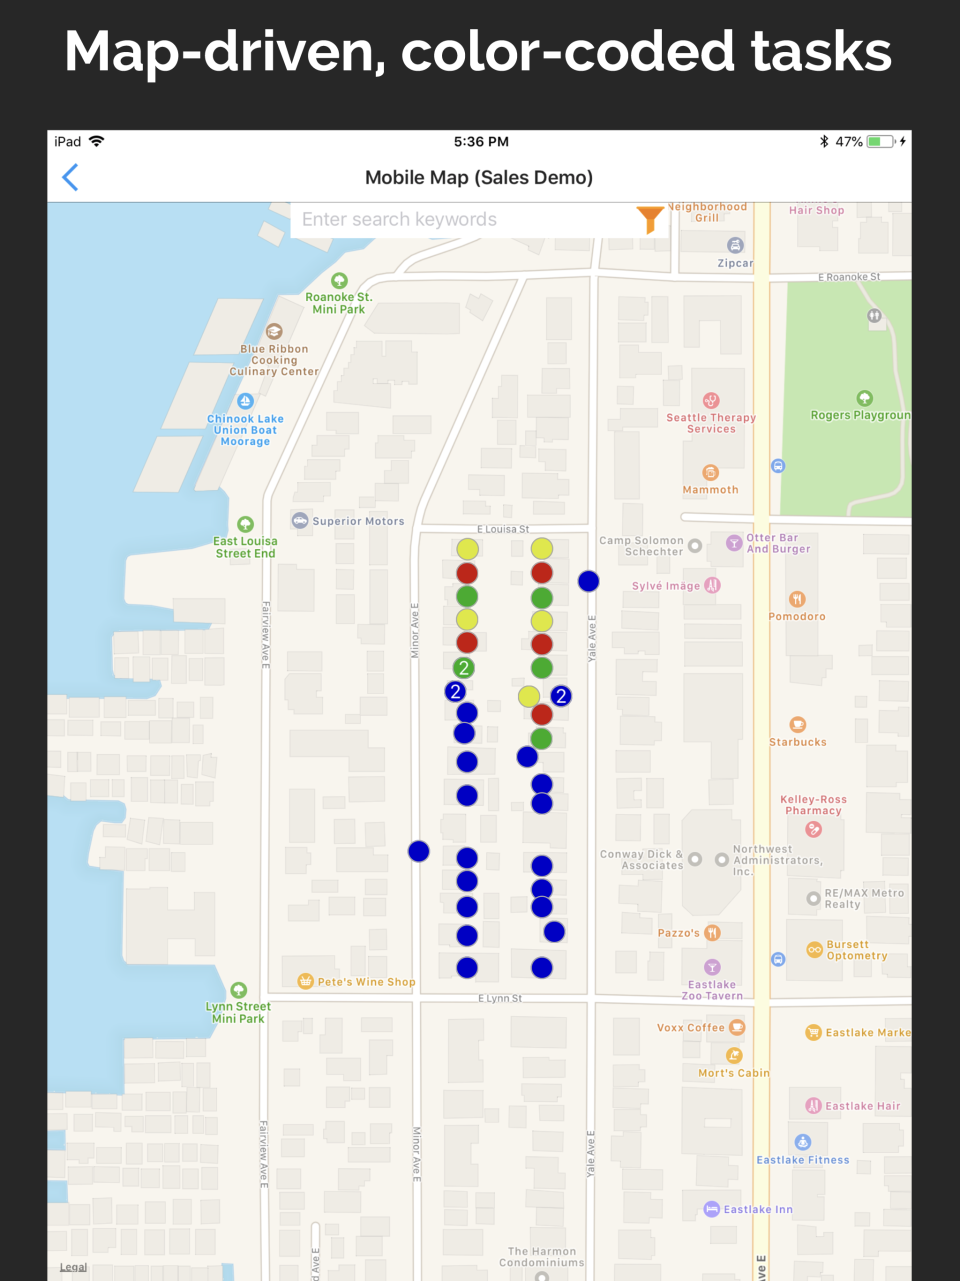 Use color-coded maps to inform where you've been, and where you're going